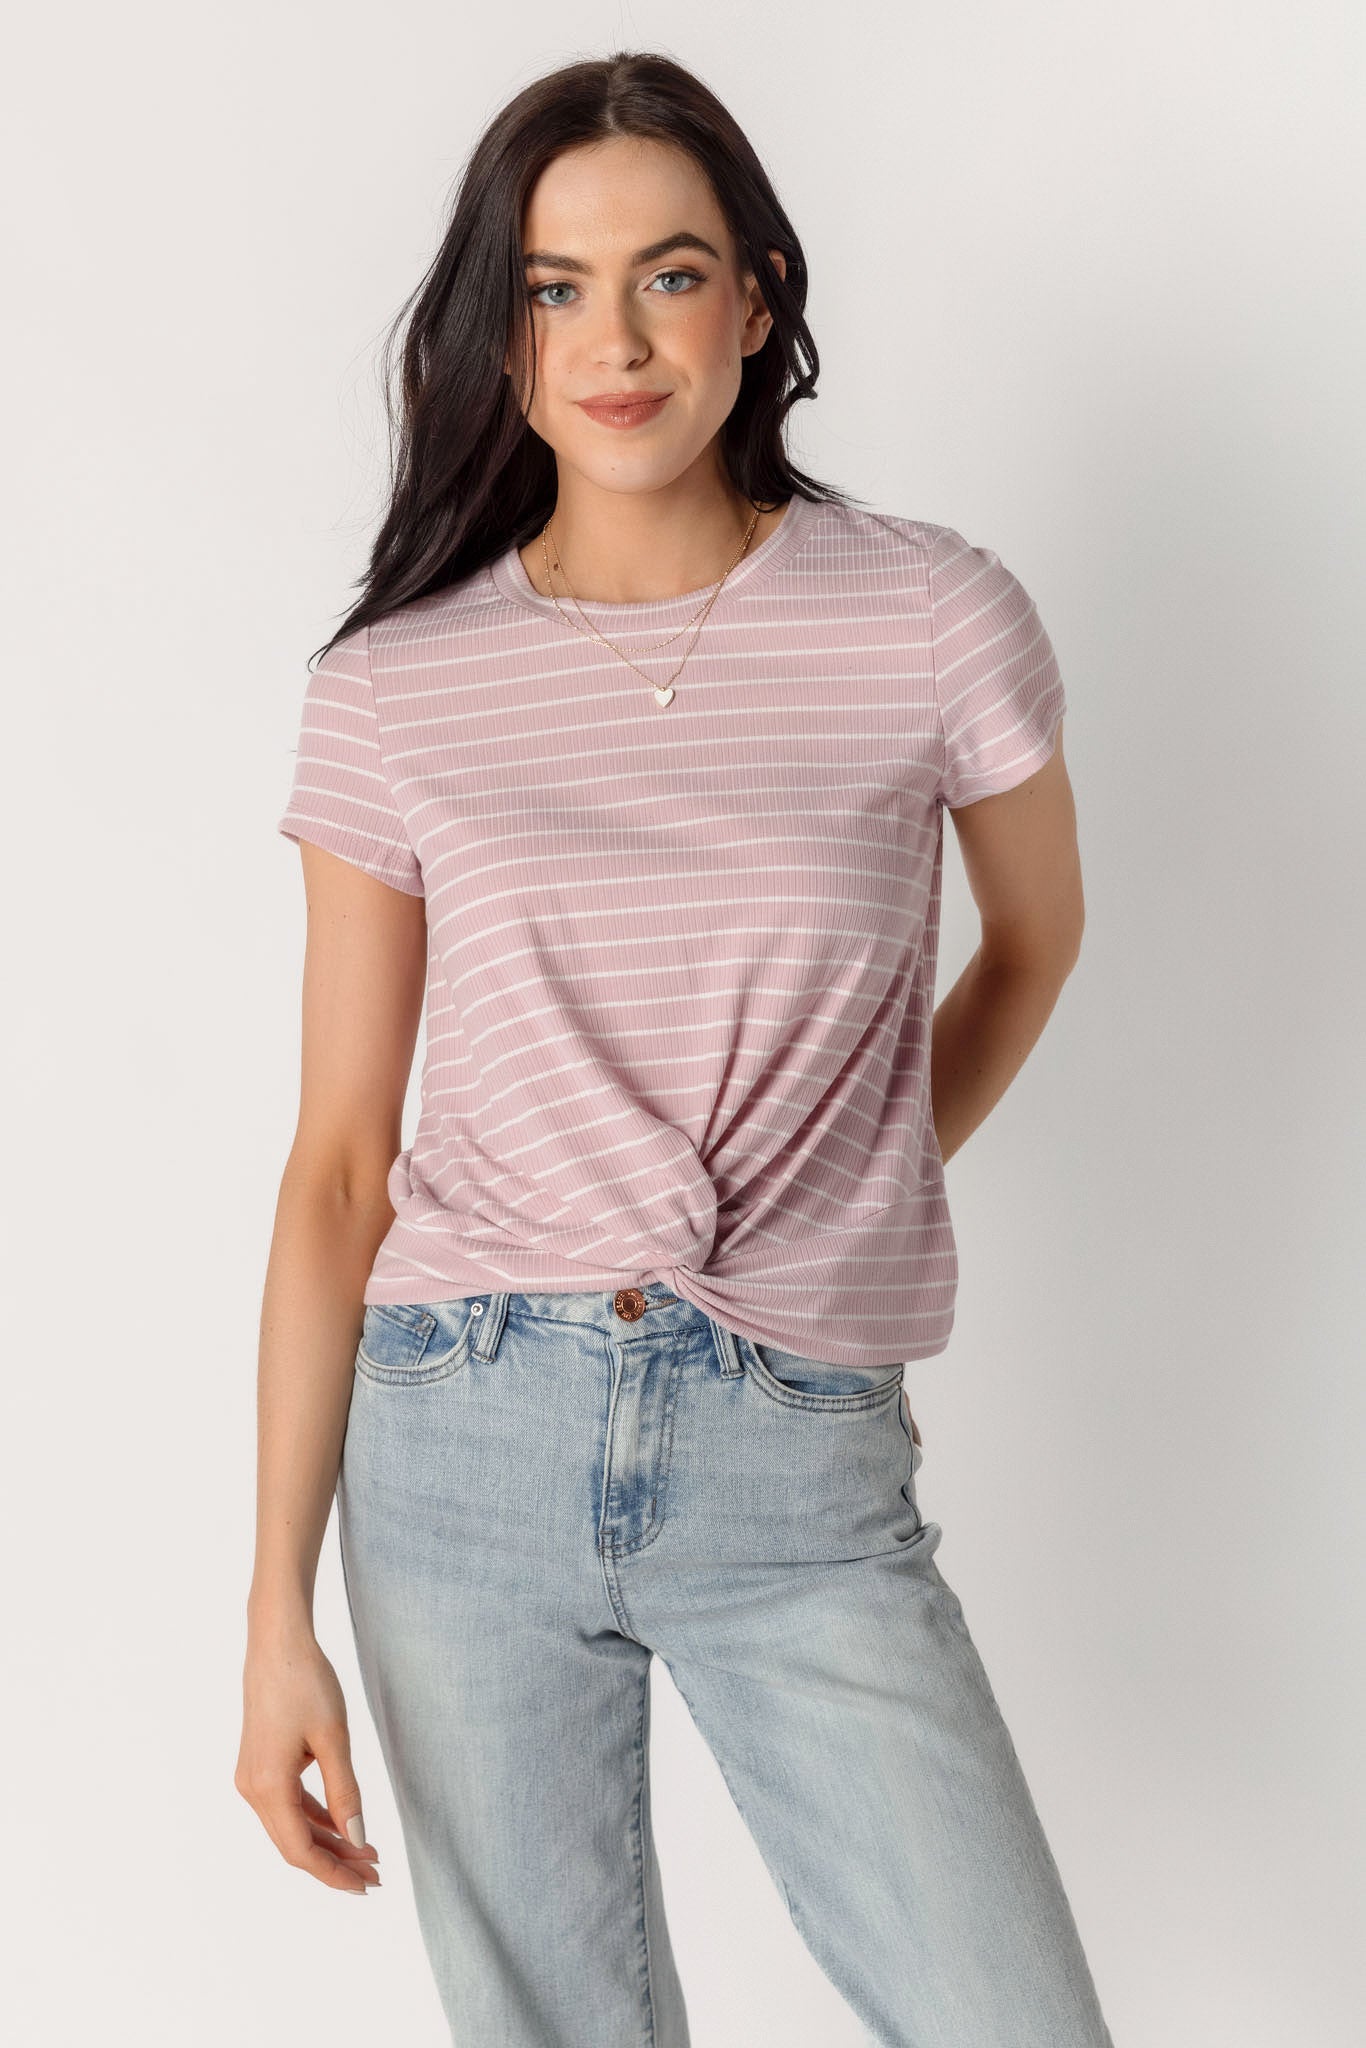 Stripe Ribbed Knotted Tee